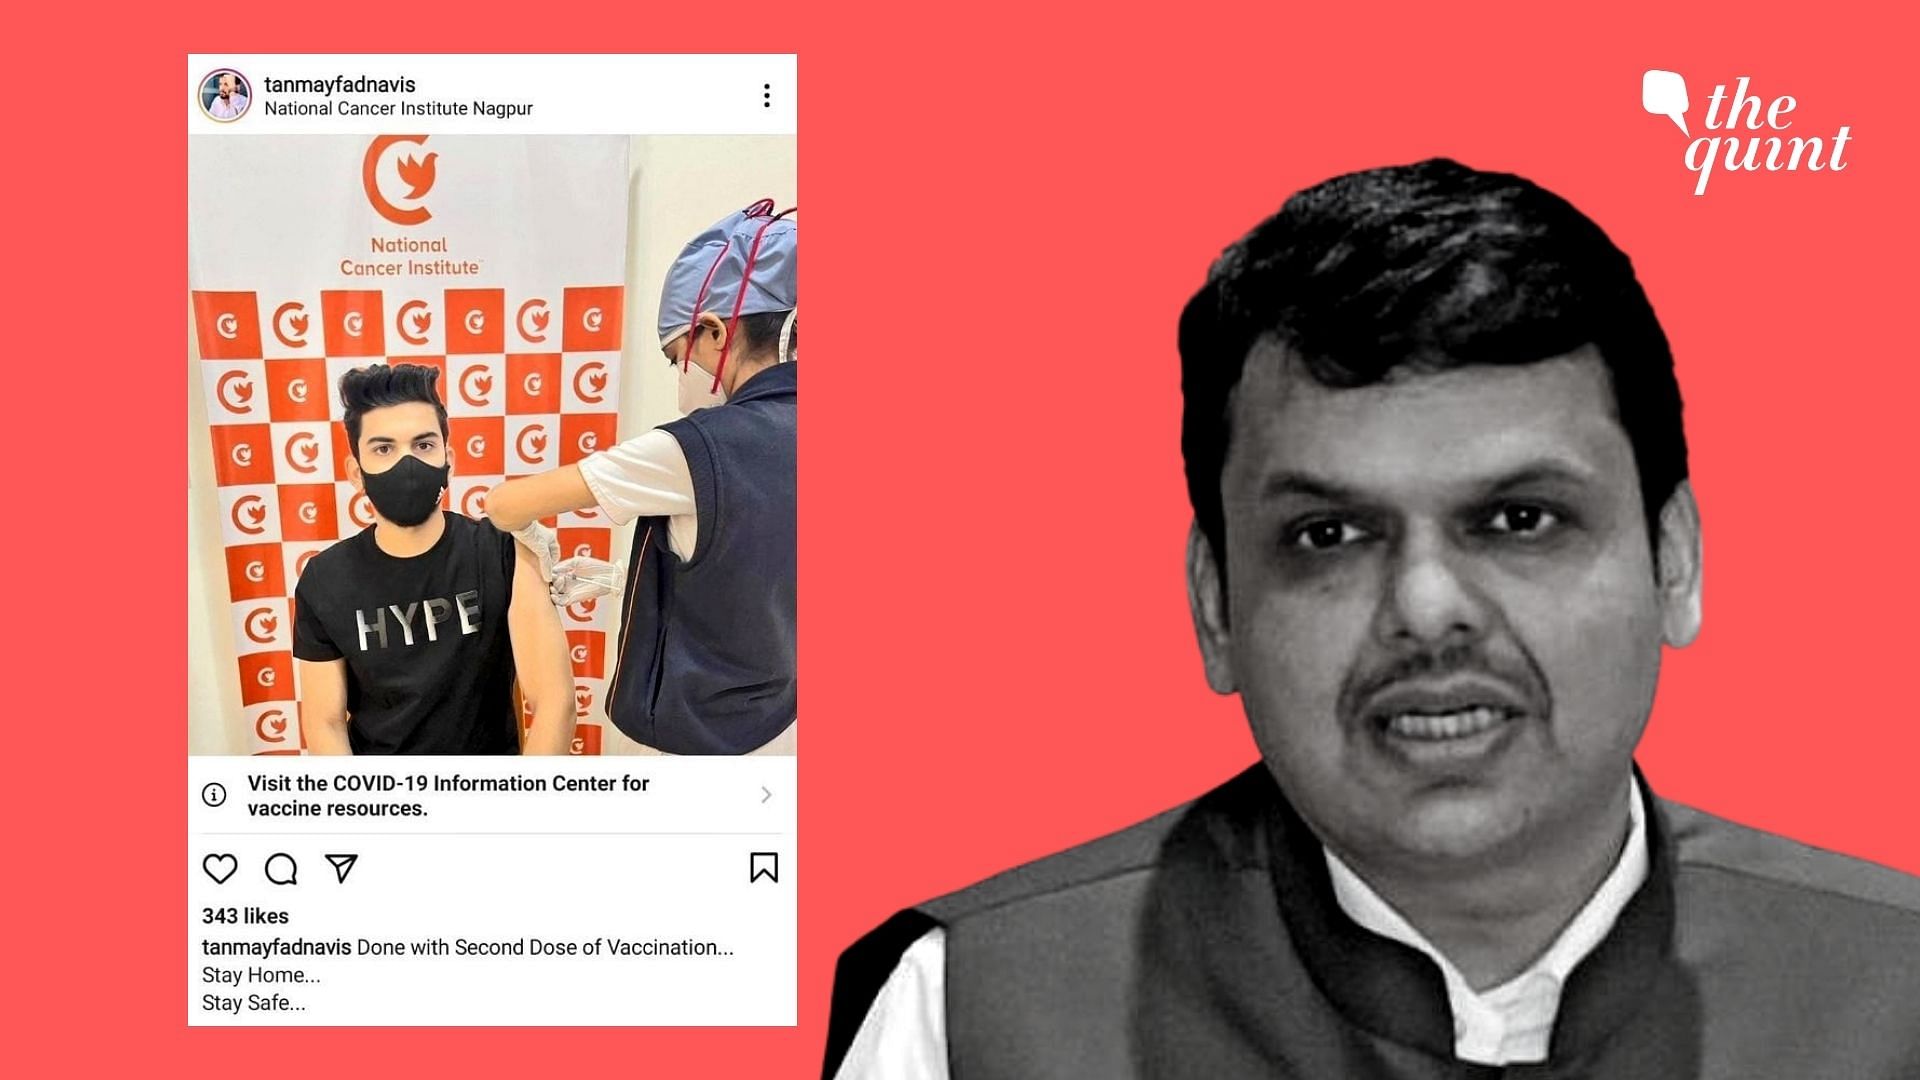 Devendra Fadnavis’ 22-year-old nephew Tanmay Fadnavis is vaccinated for COVID-19.